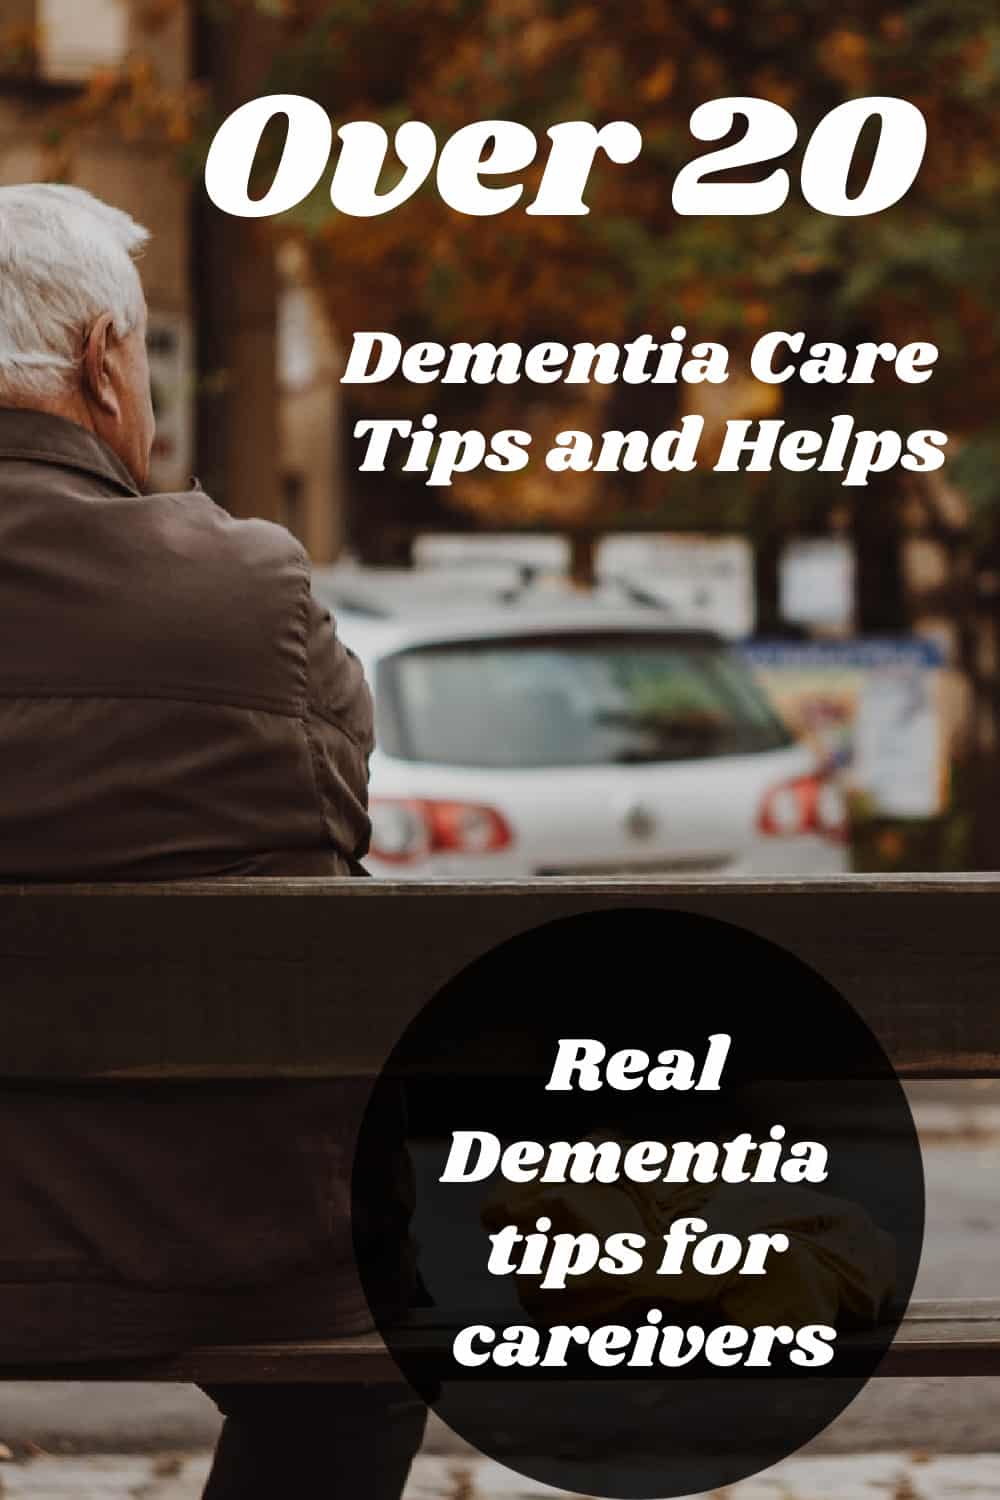 Dementia Care Tips and Helps - Real dementia care tips, helps, and solutions for caretakers. This post is filled with dementia care ideas to help caregivers.